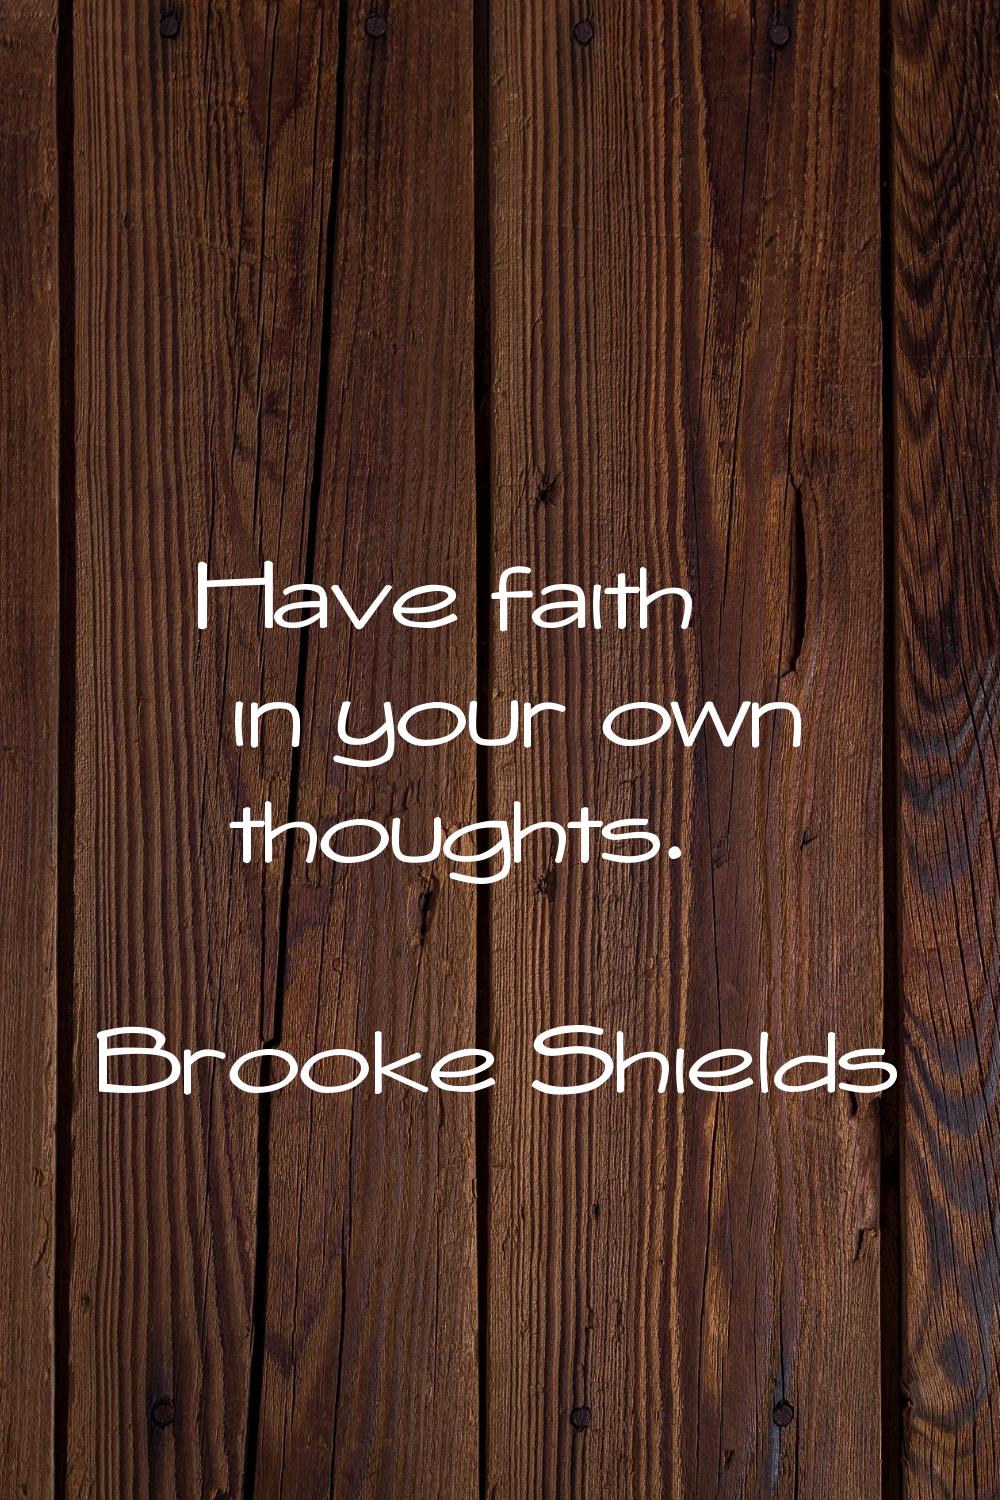 Have faith in your own thoughts.